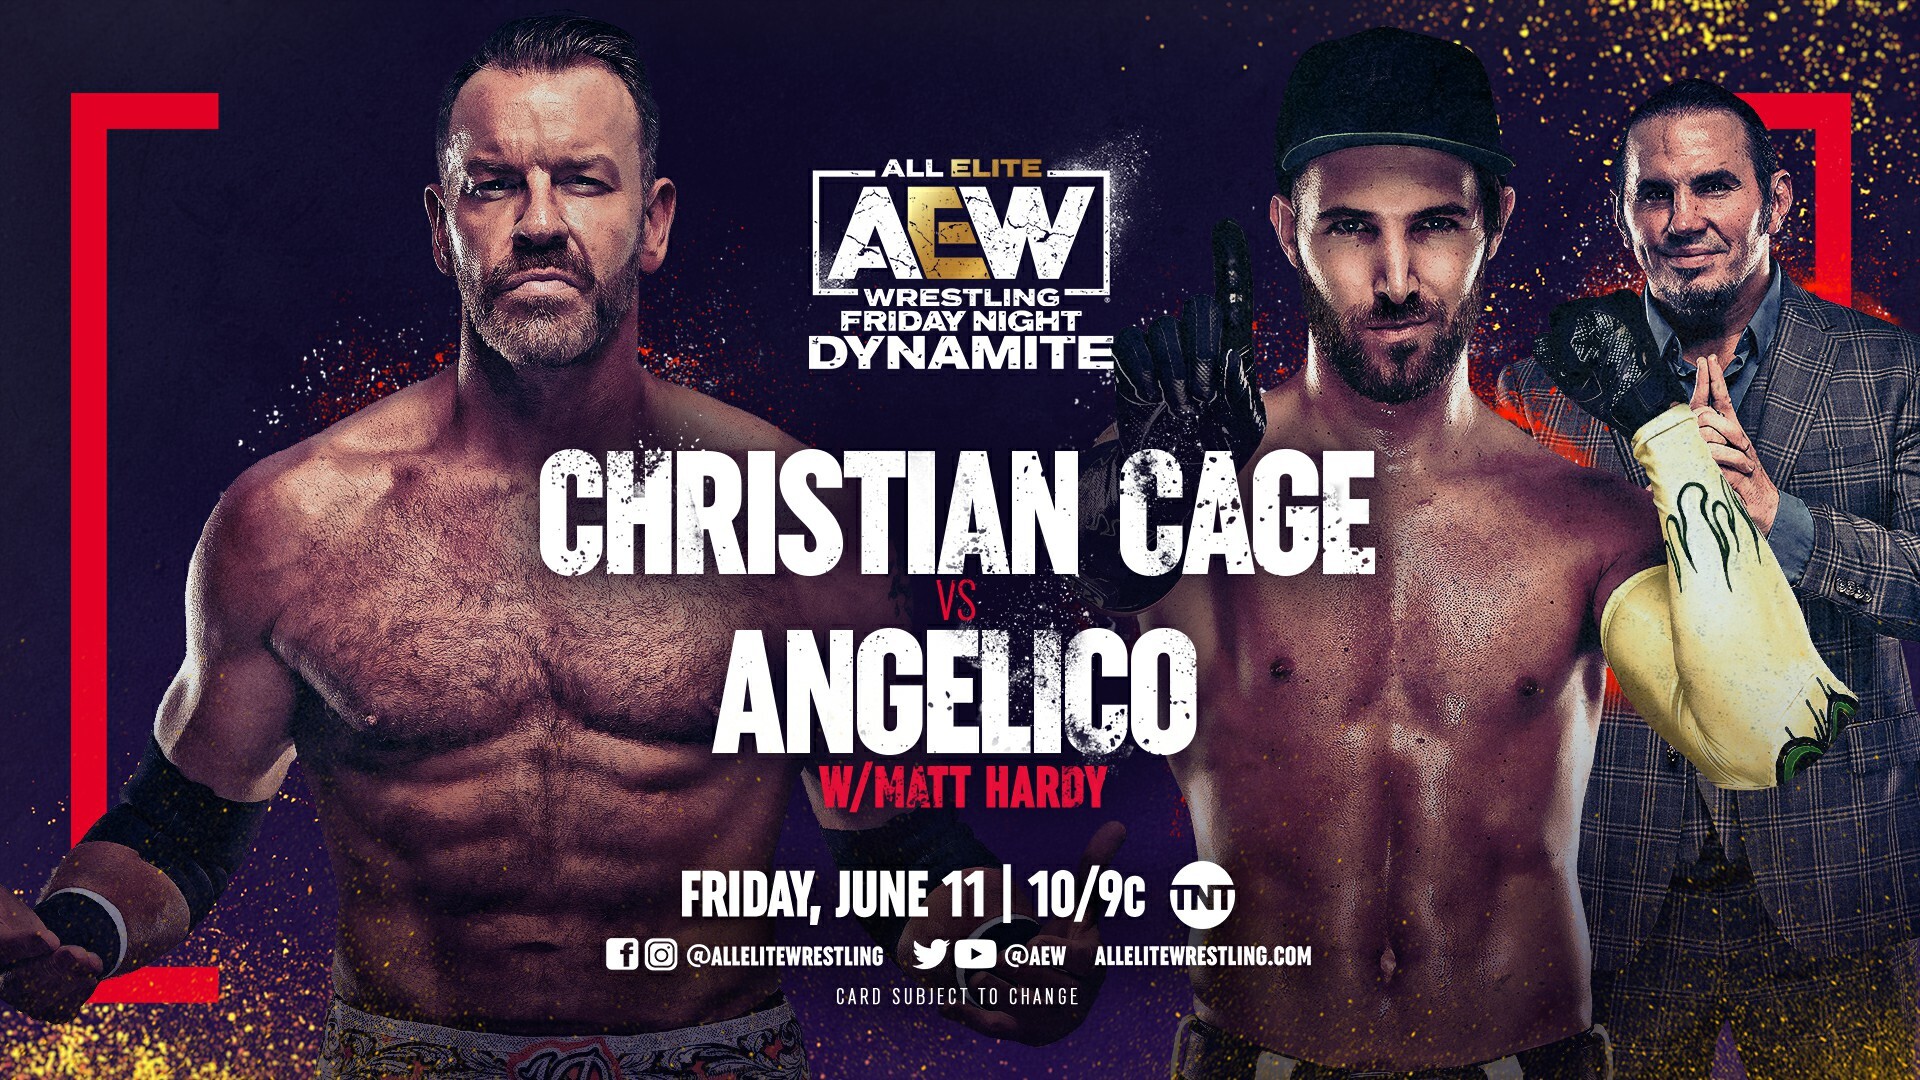 Christian Cage vs. Angelico annonuced for AEW Dynamite